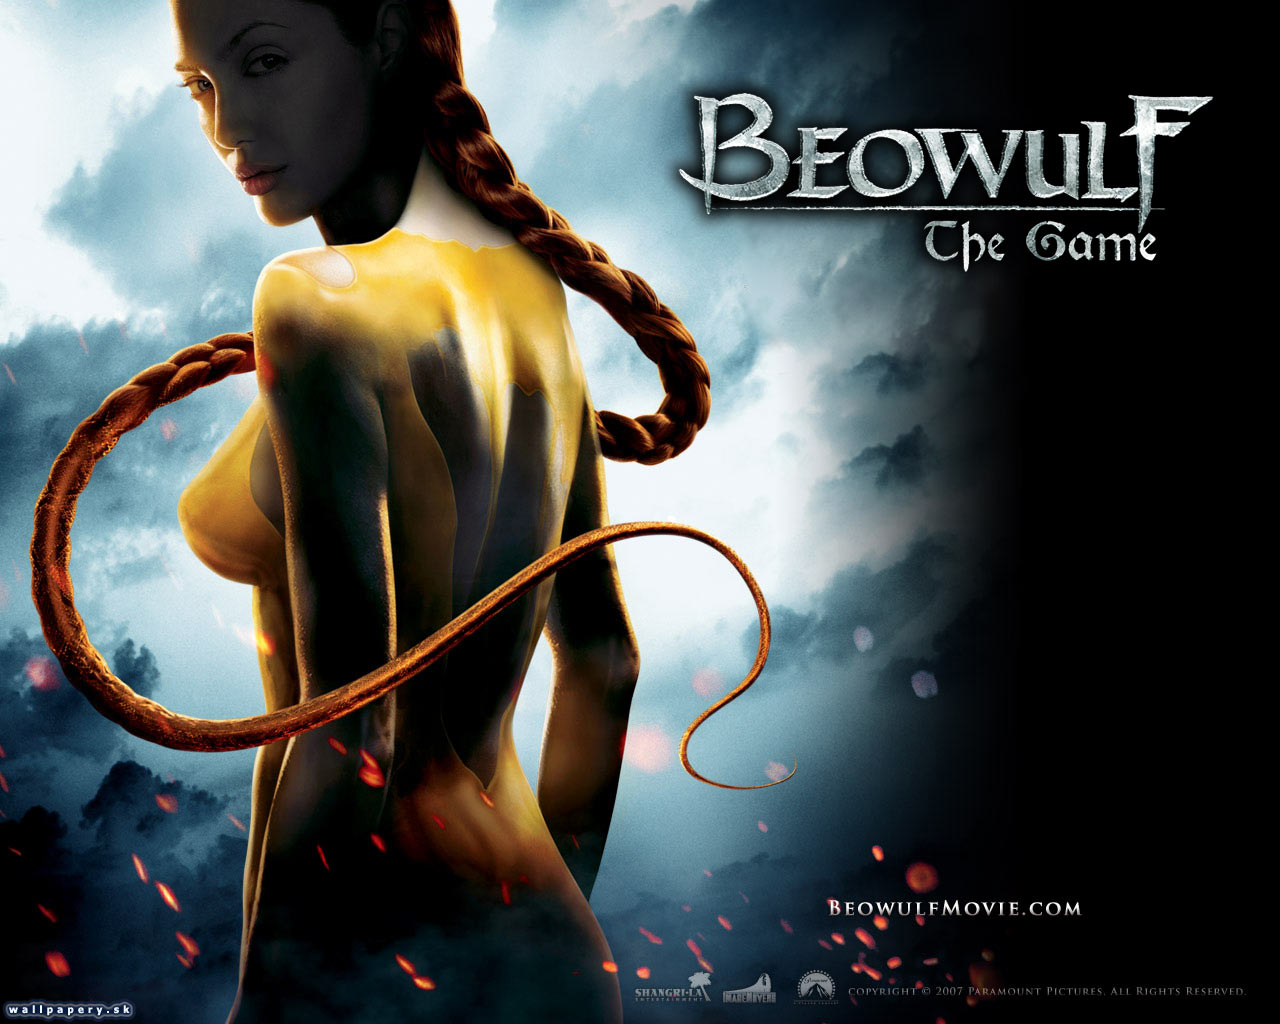 Beowulf: The Game - wallpaper 11